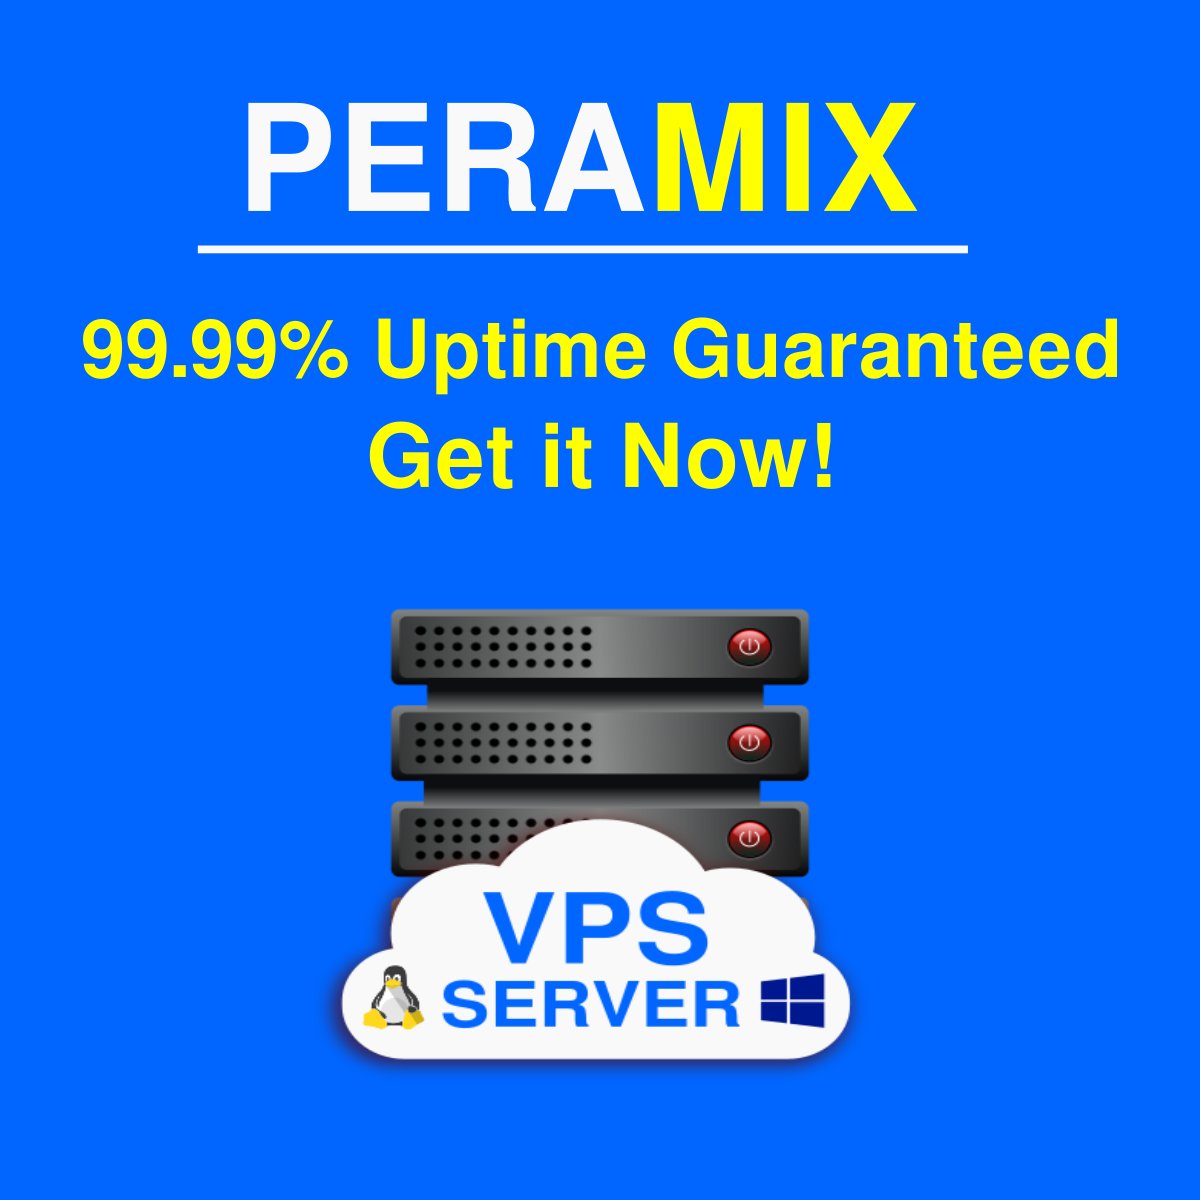 🚀 Need top-notch VPS hosting without breaking the bank? We’ve got you covered! 🌟

🔹 Best-in-market prices 🔹 Unmatched uptime 🔹 24/7 support
Switch to smarter hosting with Peramix. Check out our unbeatable offers! 🔗peramix.com/vps
#VPSHosting #ReliableHosting